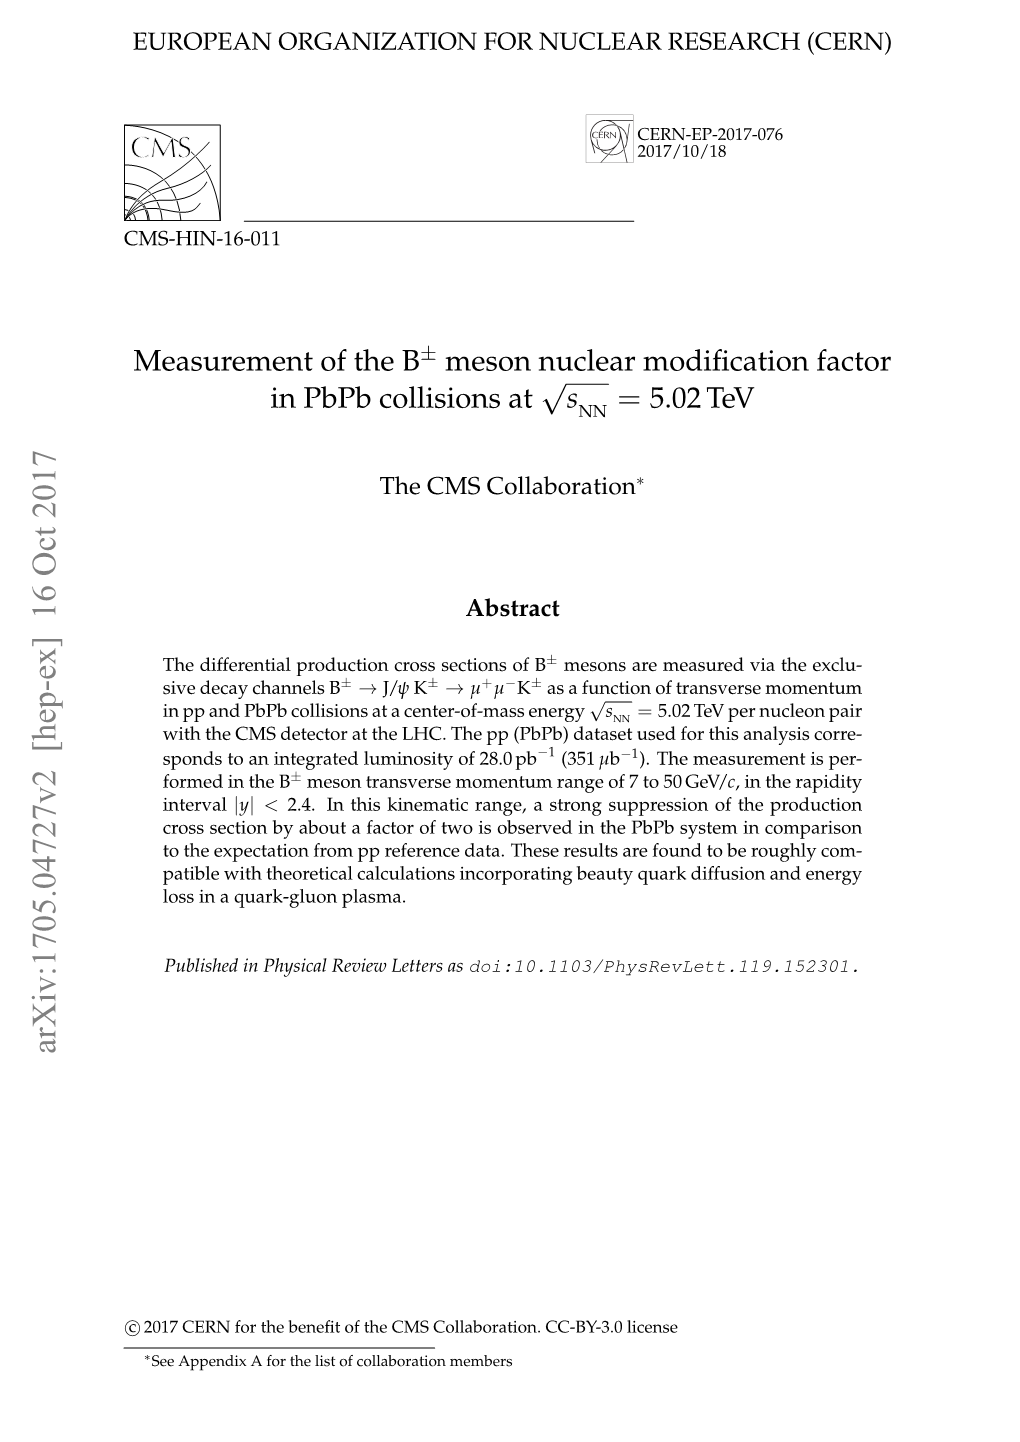 Meson Differential Production Cross Sections in Pp and Pbpb Collisions